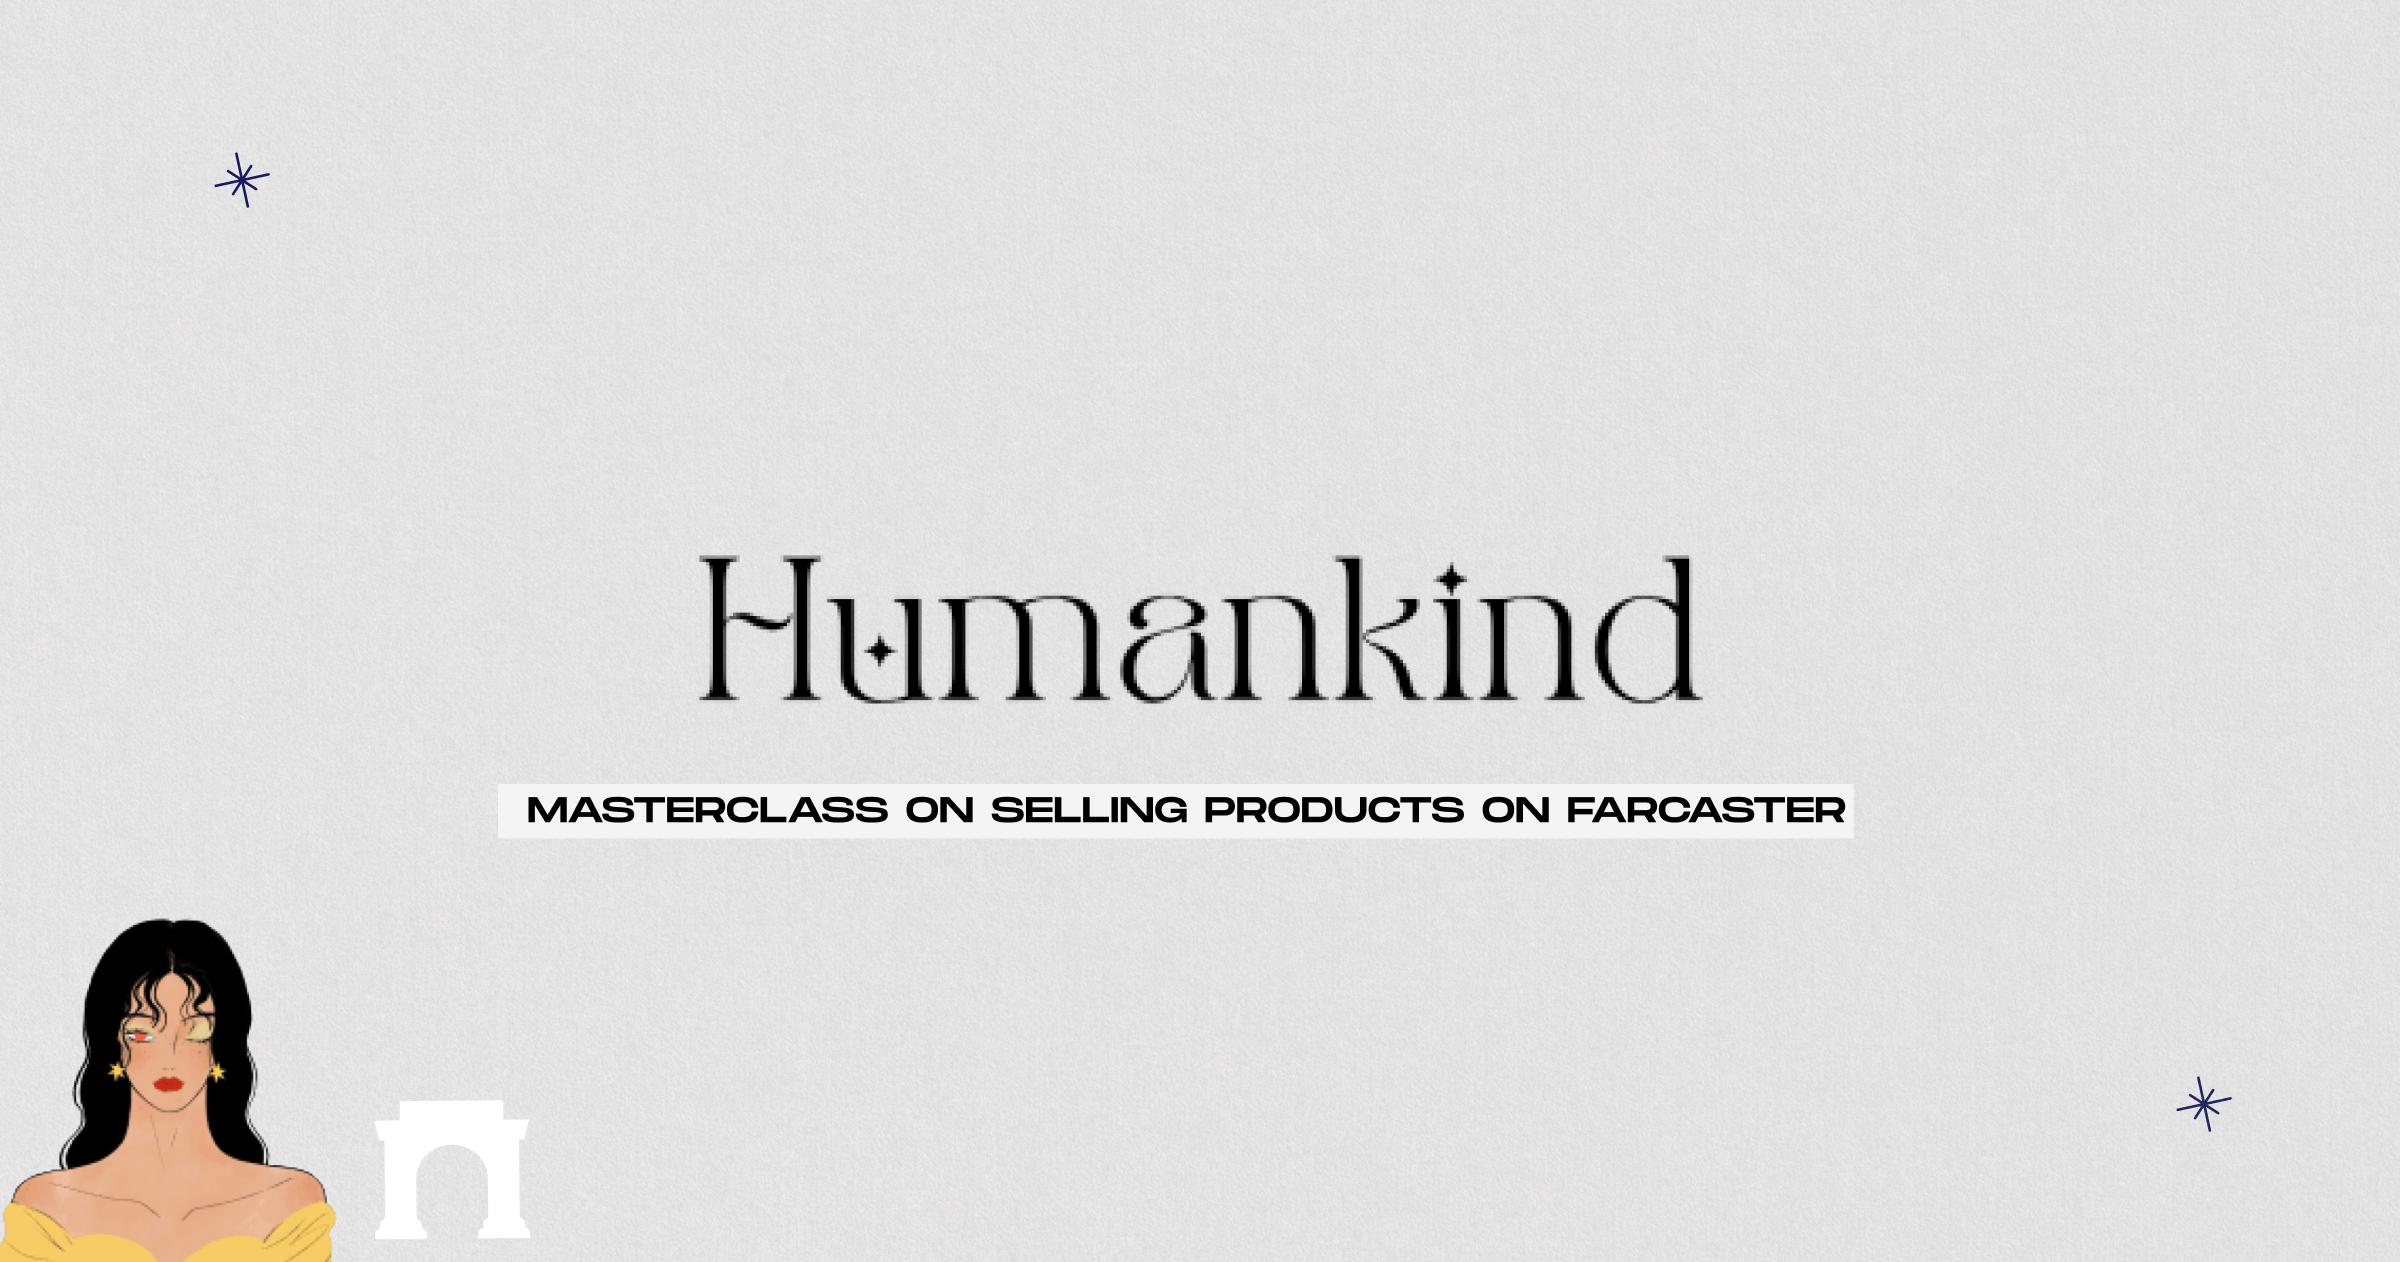 Humankind farcaster master class by6nl